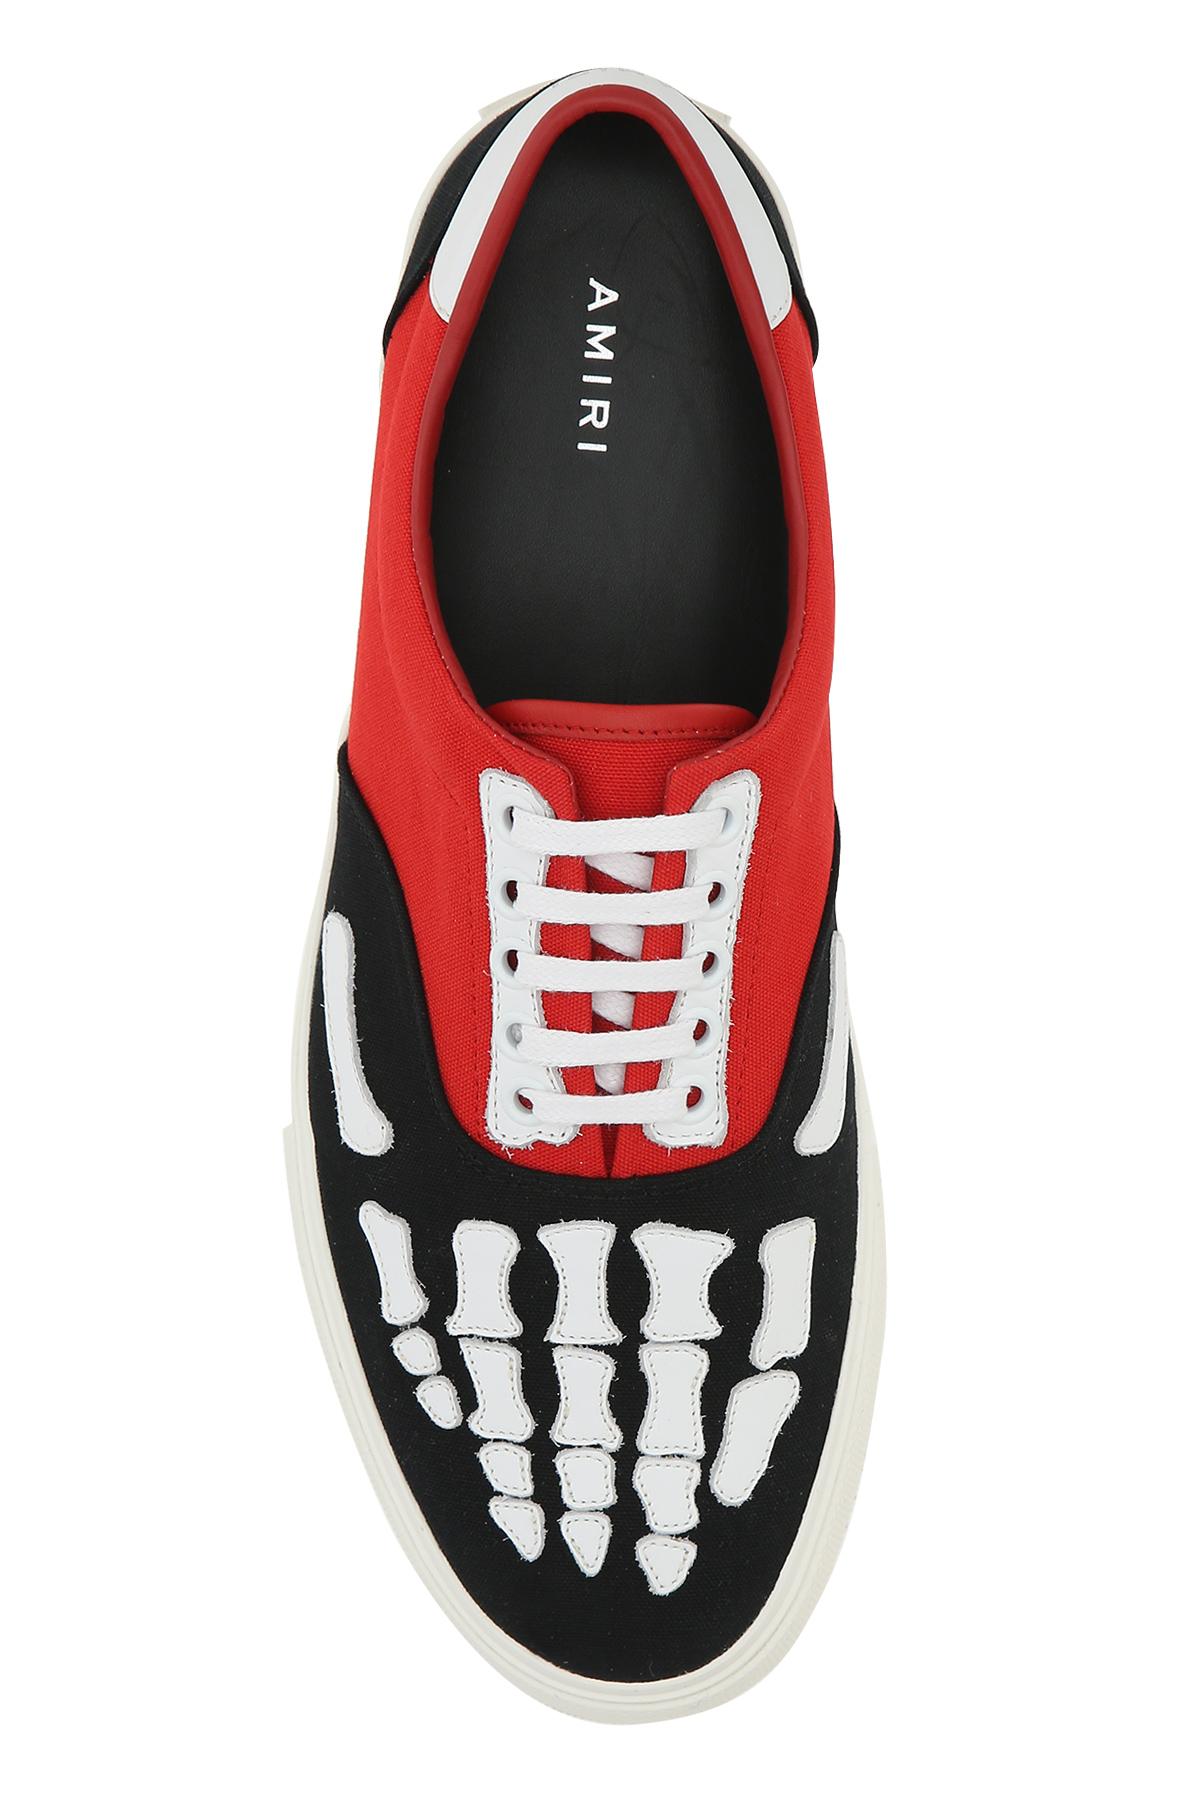 Amiri Skel Toe Leather-trimmed Colour-block Canvas Sneakers in Black Red  (Red) for Men - Lyst